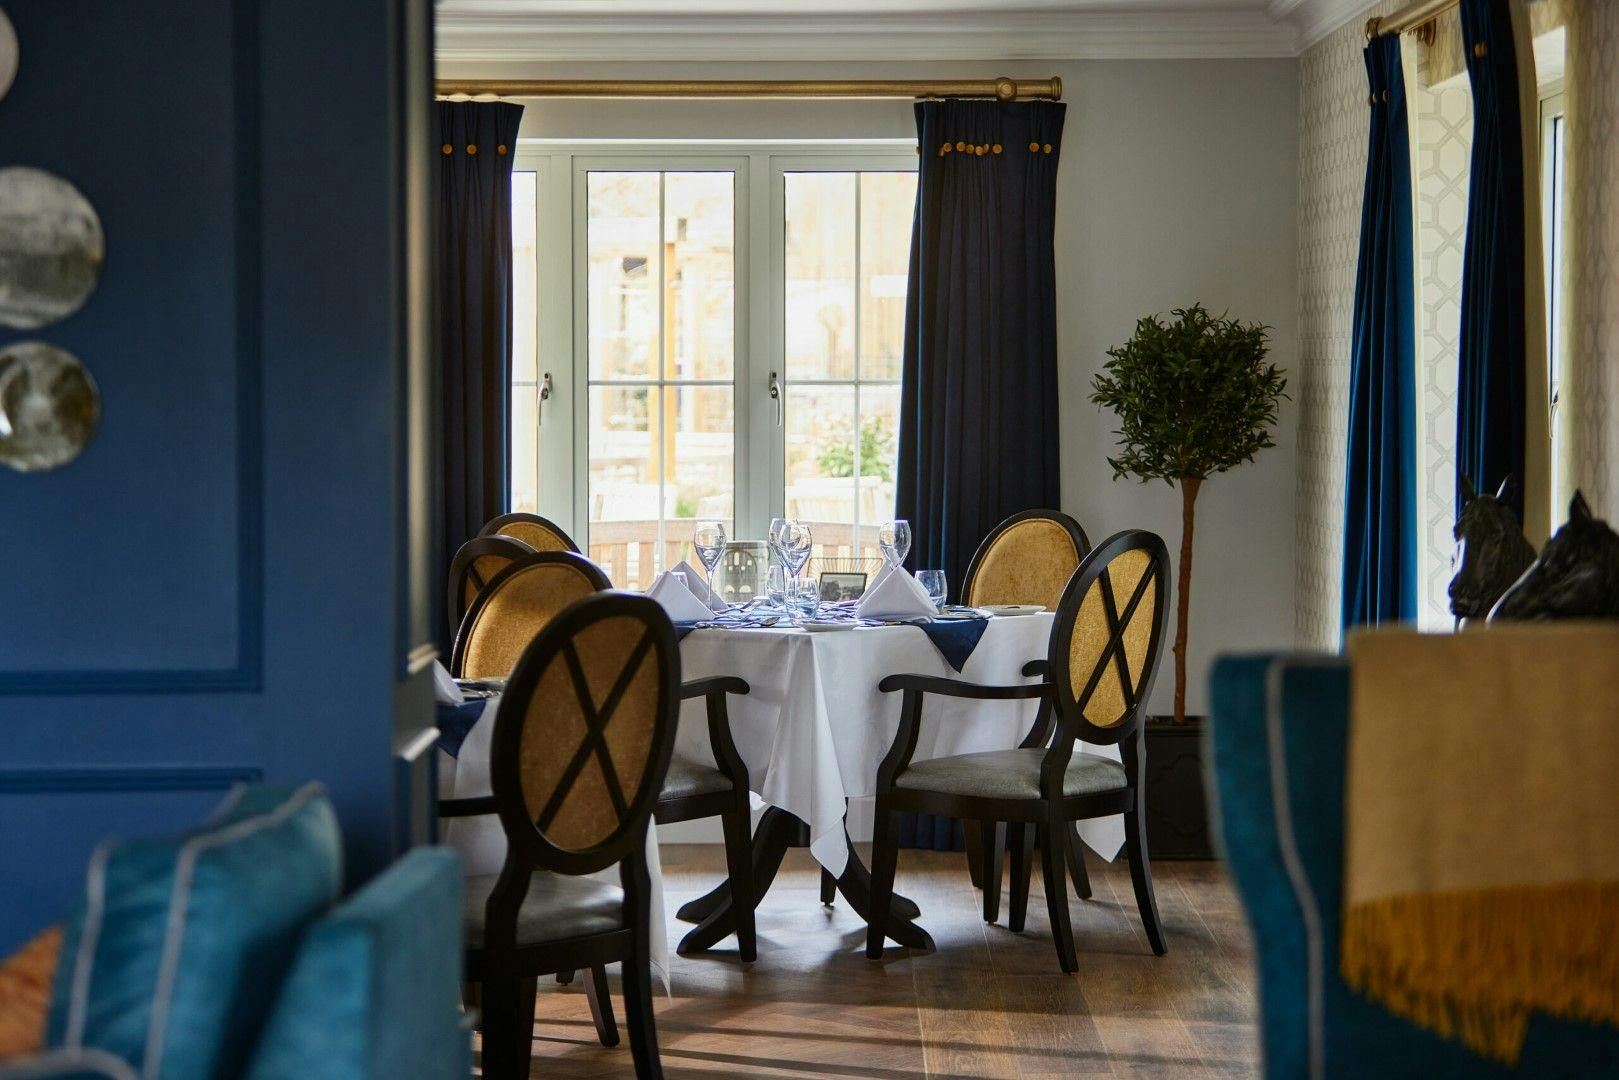 Dining Area at Midford Manor Care Home in Bath, Somerset